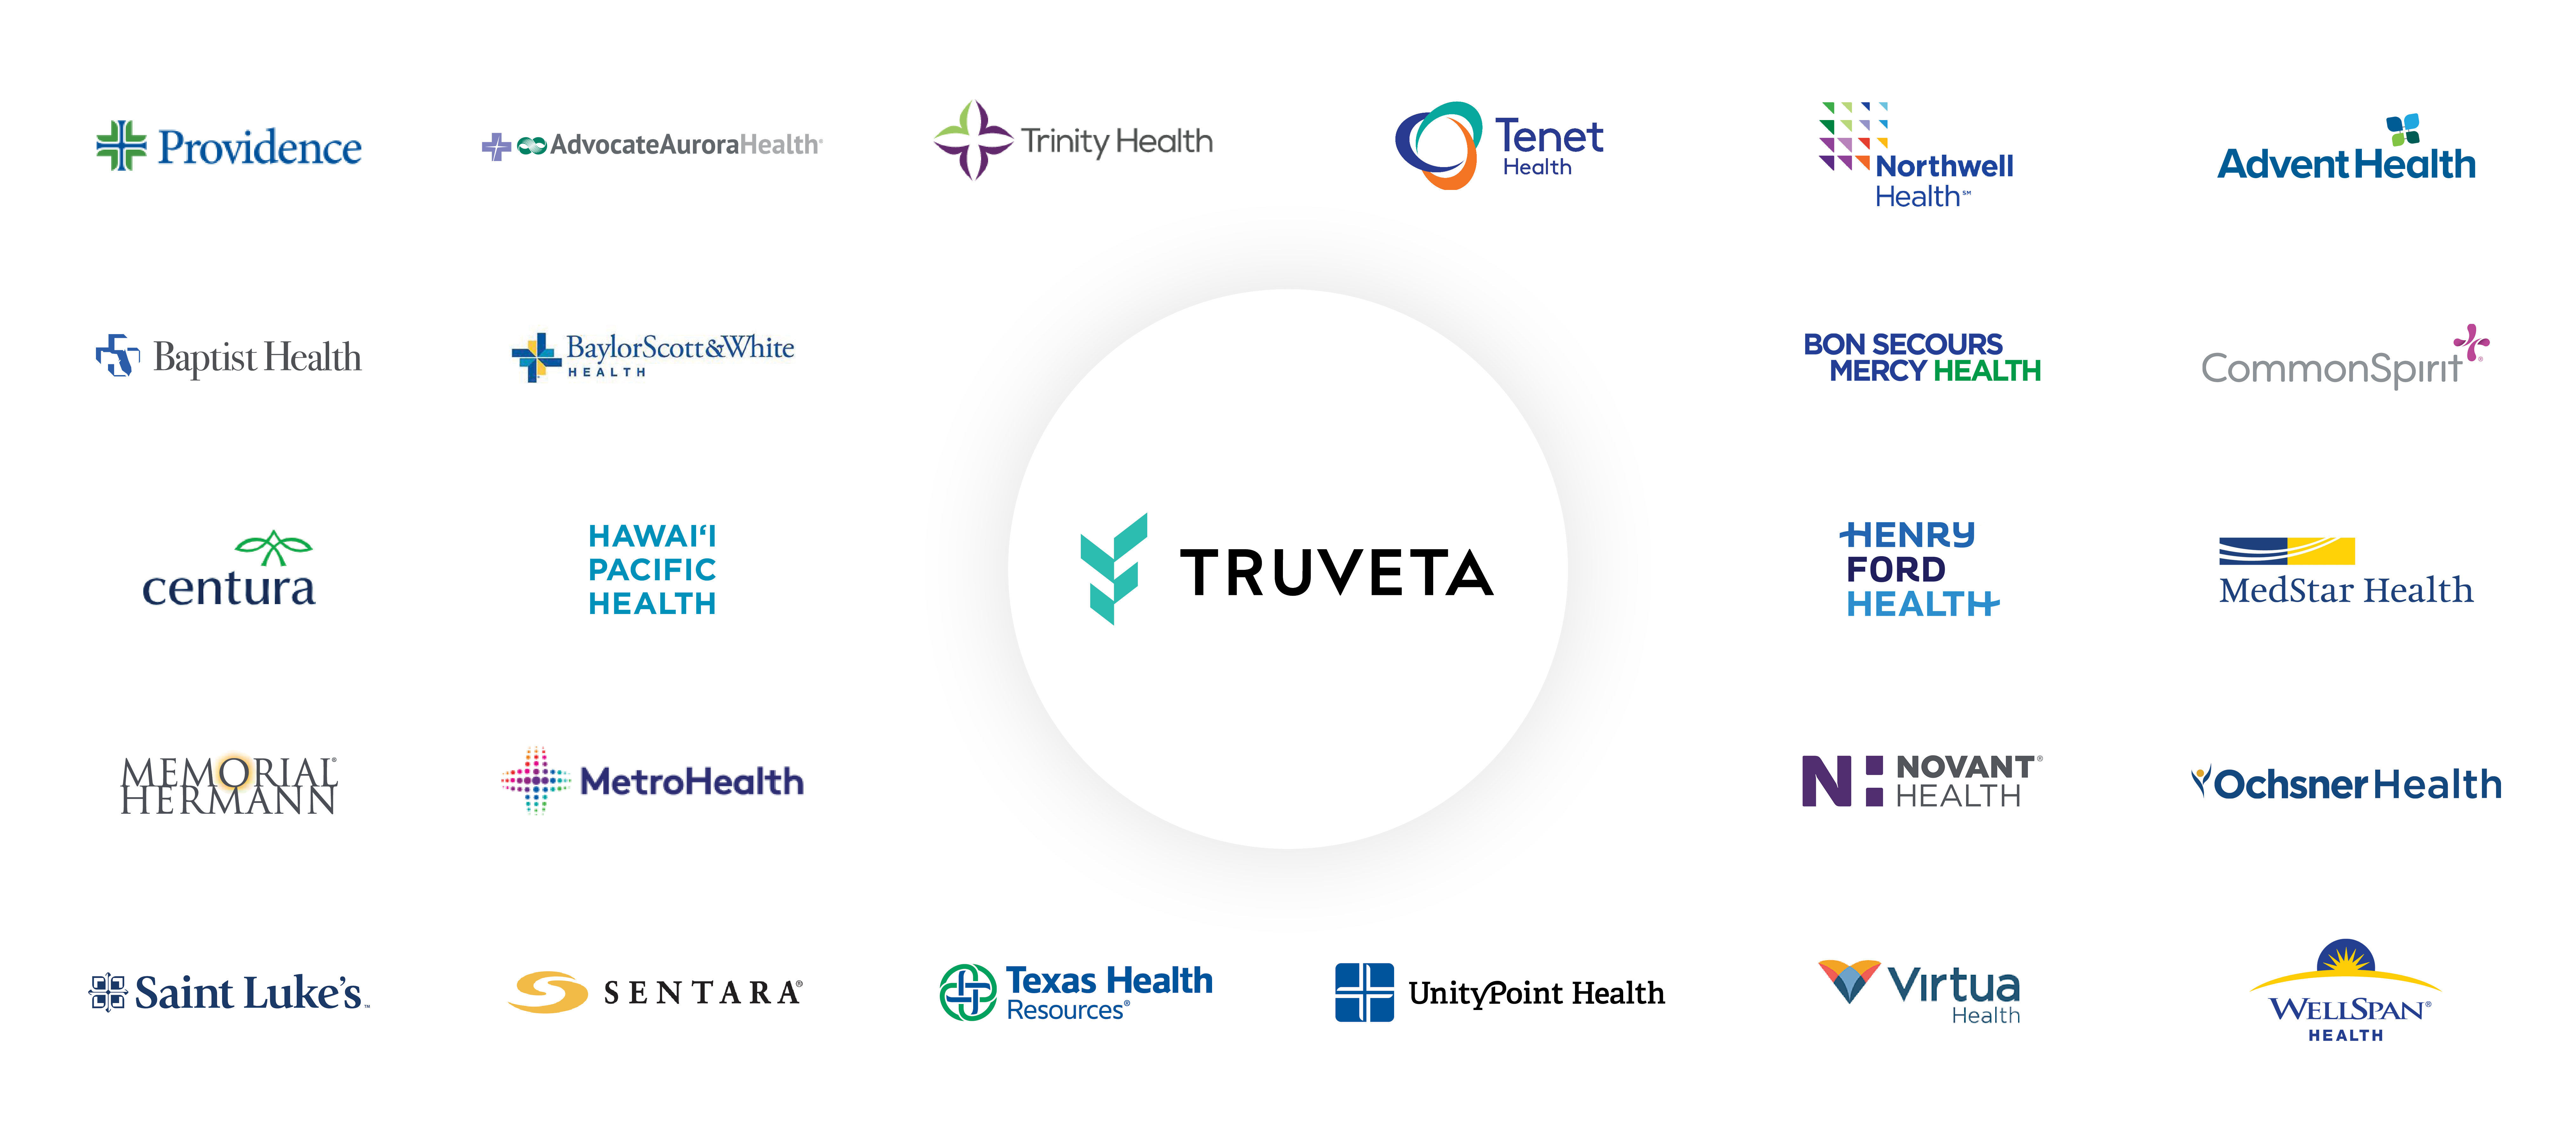 Truveta welcomes four new health system members joining its vision of saving lives with data